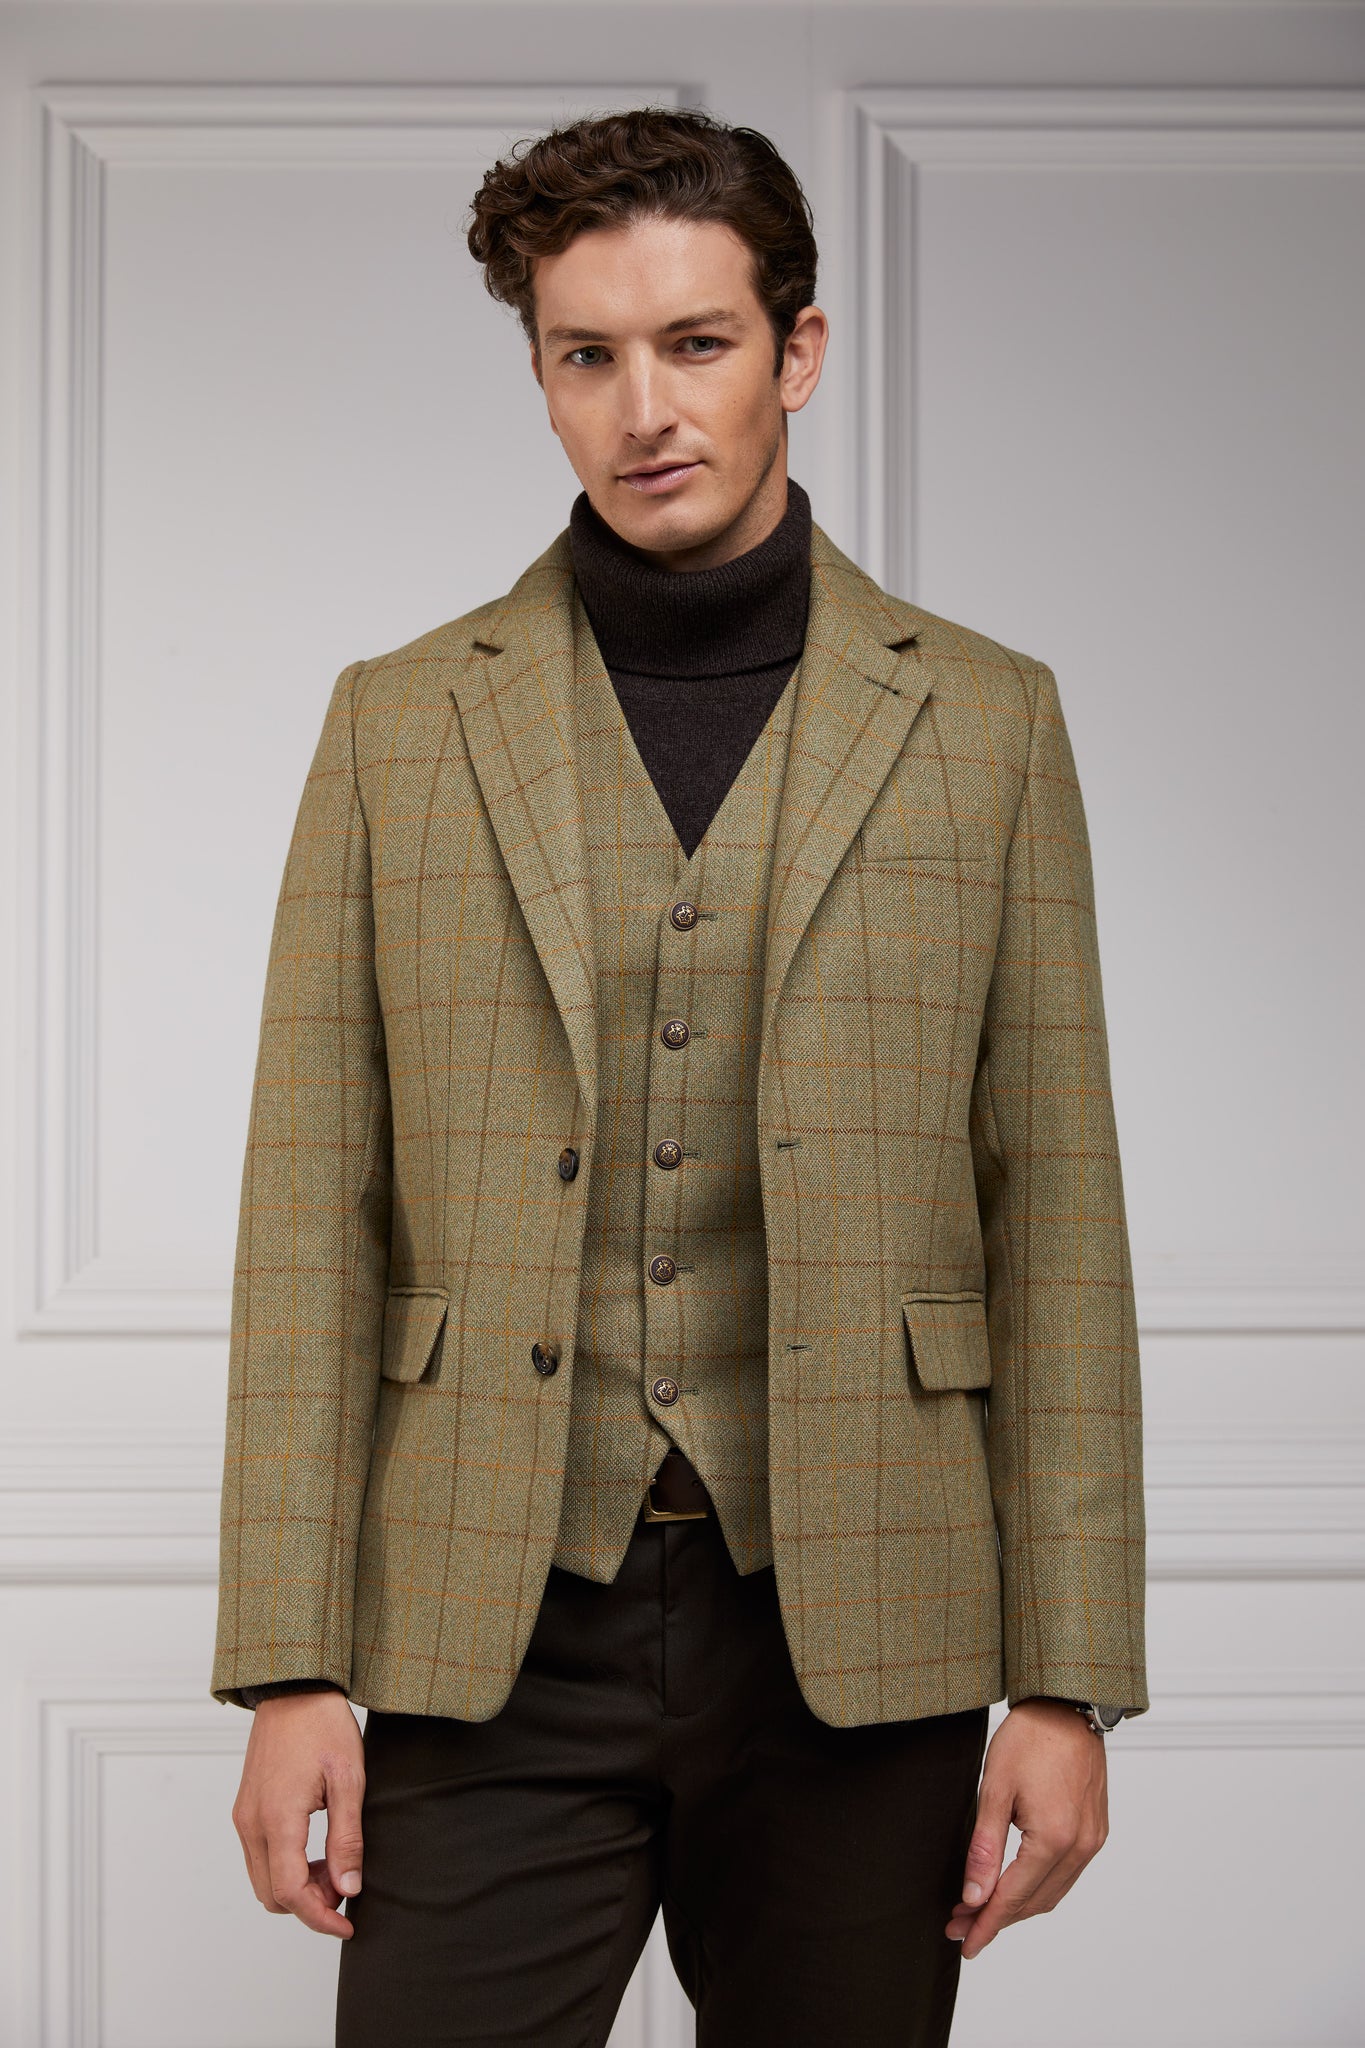 Shop All Menswear – Page 6 – Holland Cooper